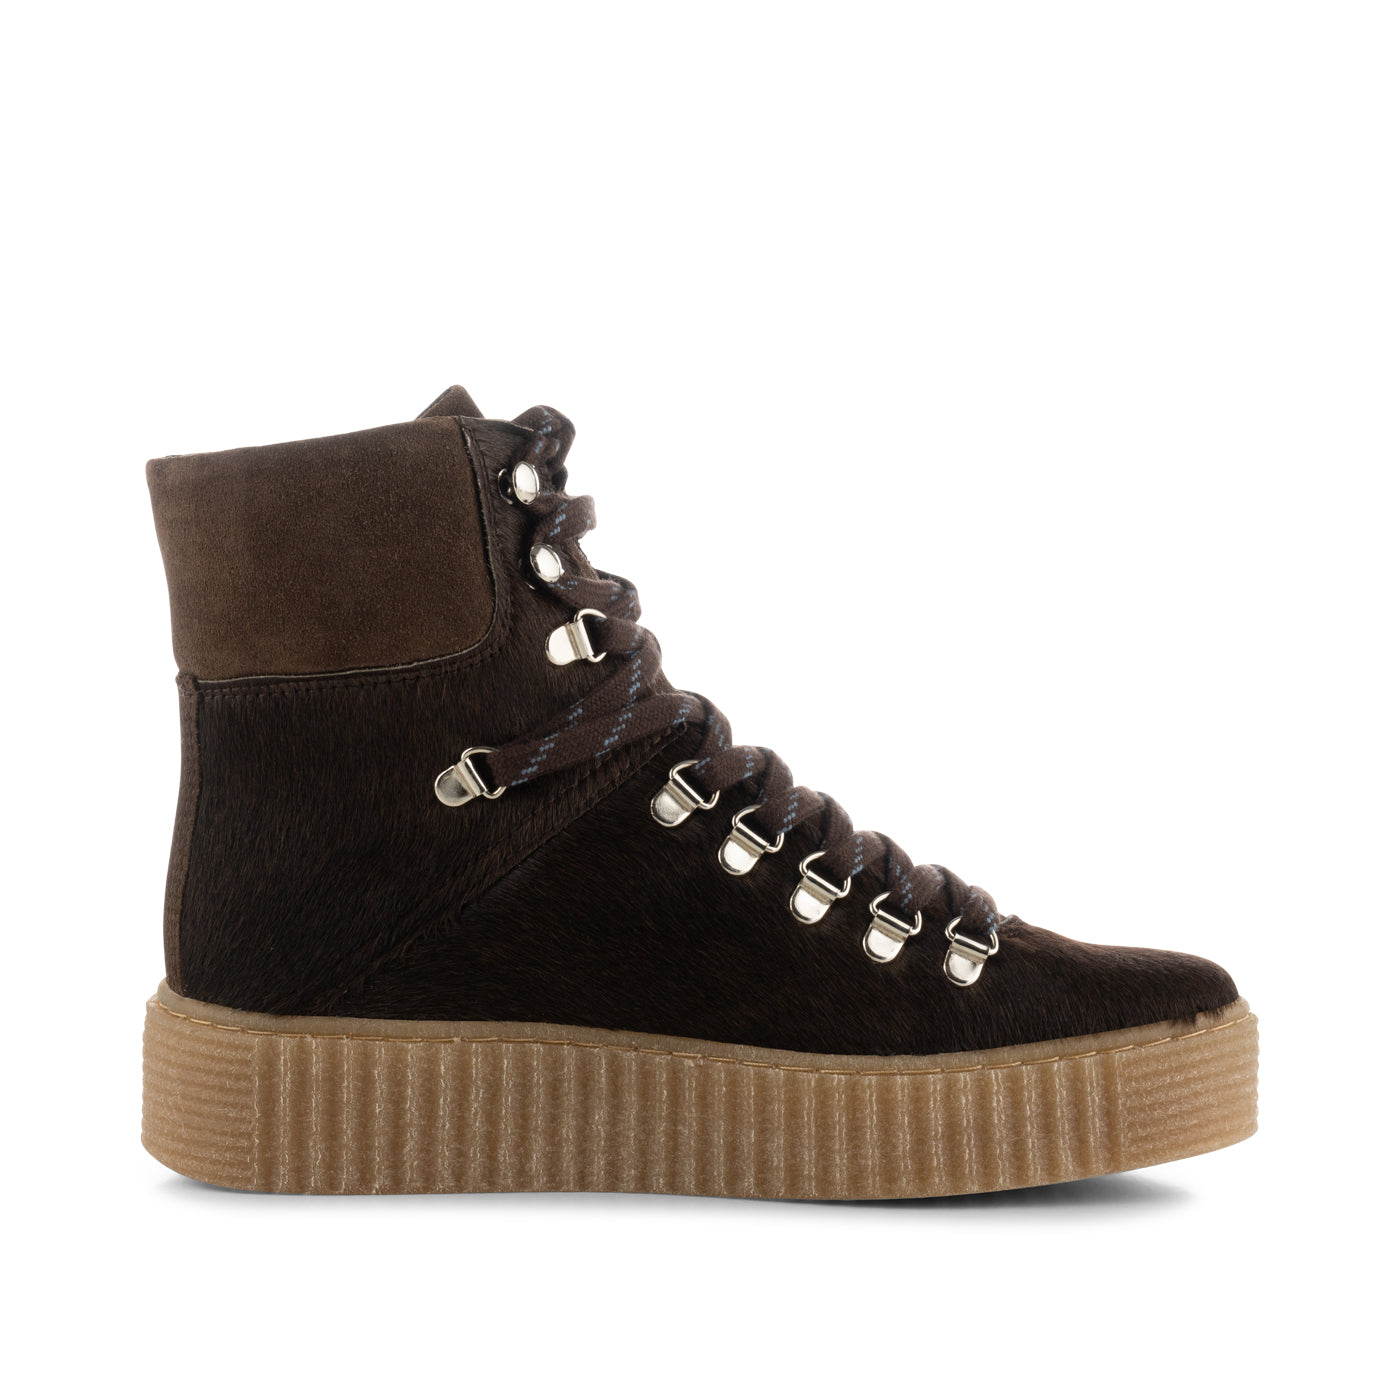 SHOE THE BEAR WOMENS Agda boot suede Boots 872 BROWN PONY